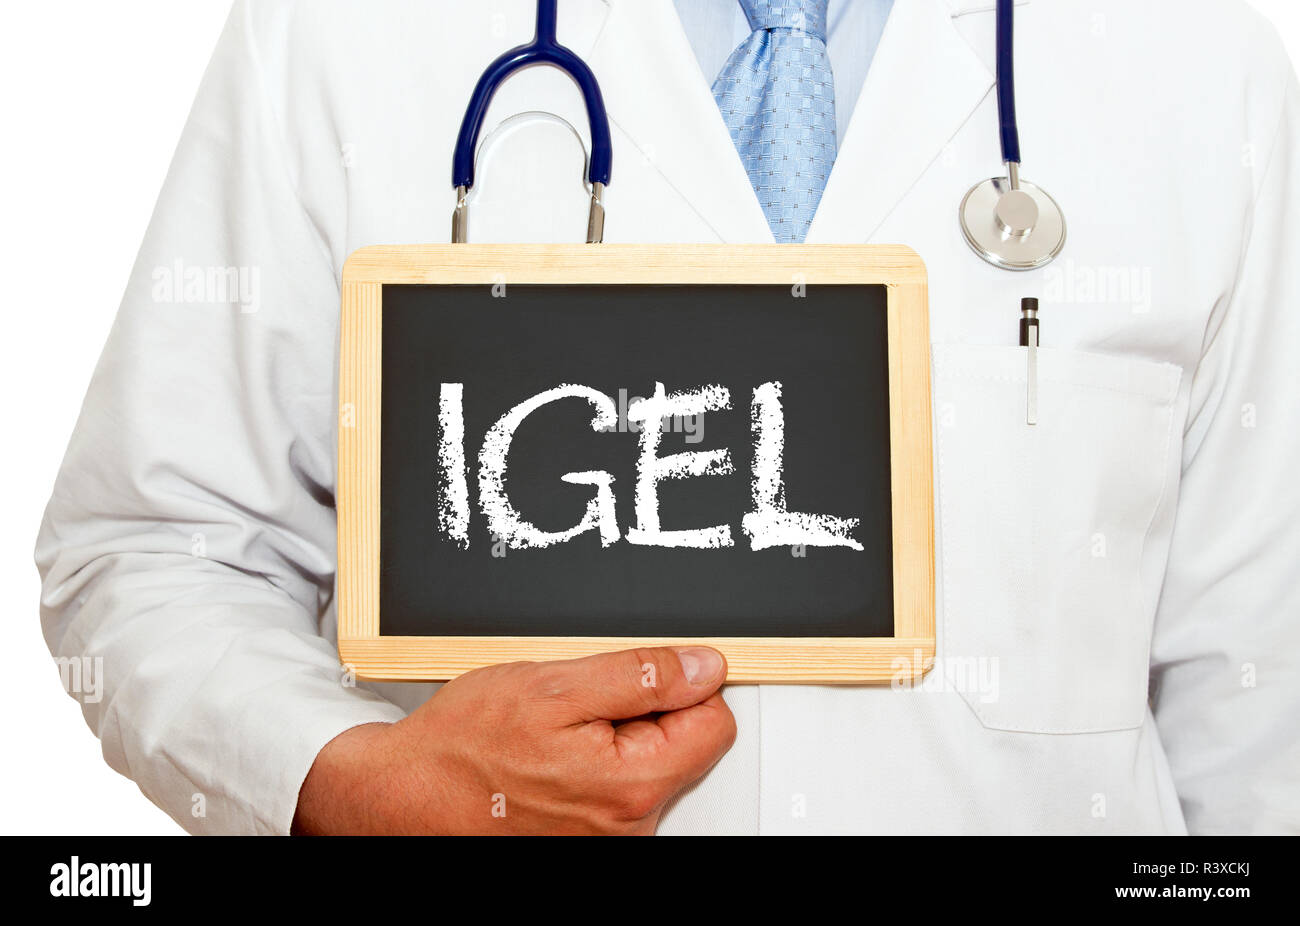 igel - individual health services Stock Photo